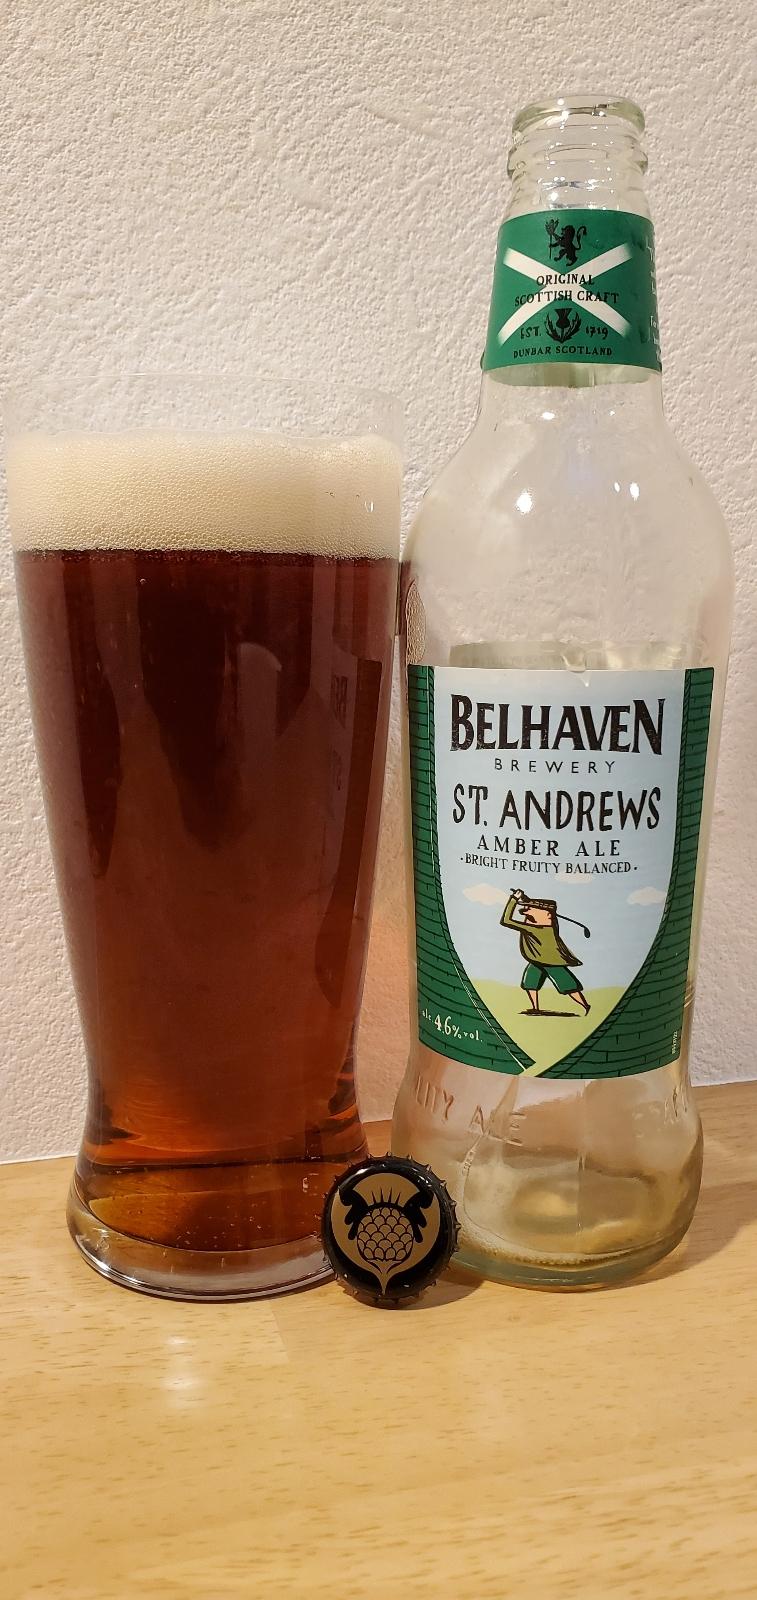 St. Andrews Amber Ale